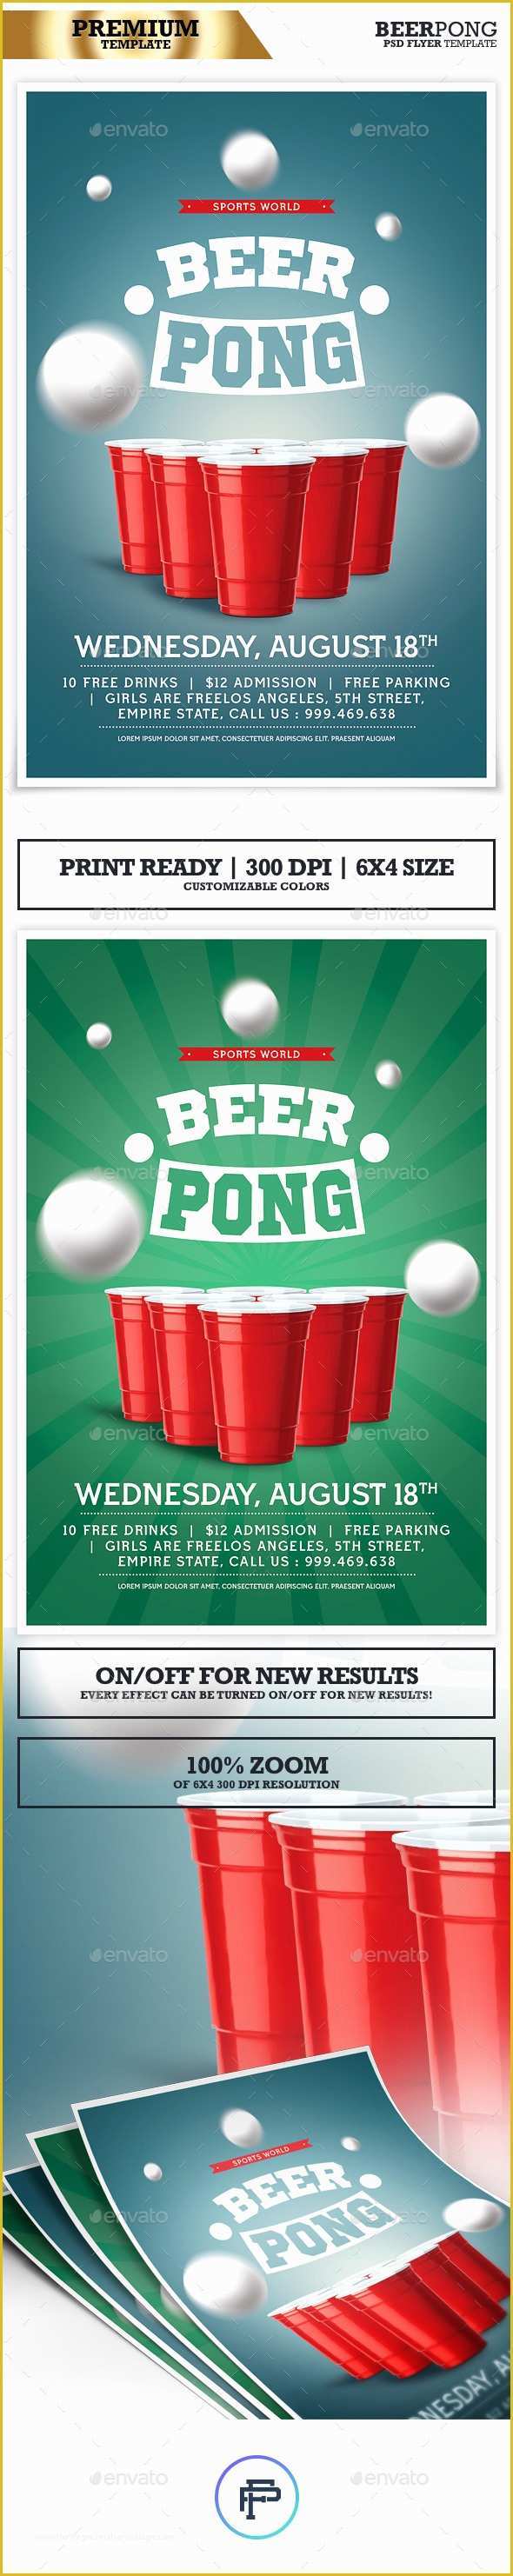 Free Beer Pong Flyer Template Of Beer Pong tournament Flyer by Platinumfusion